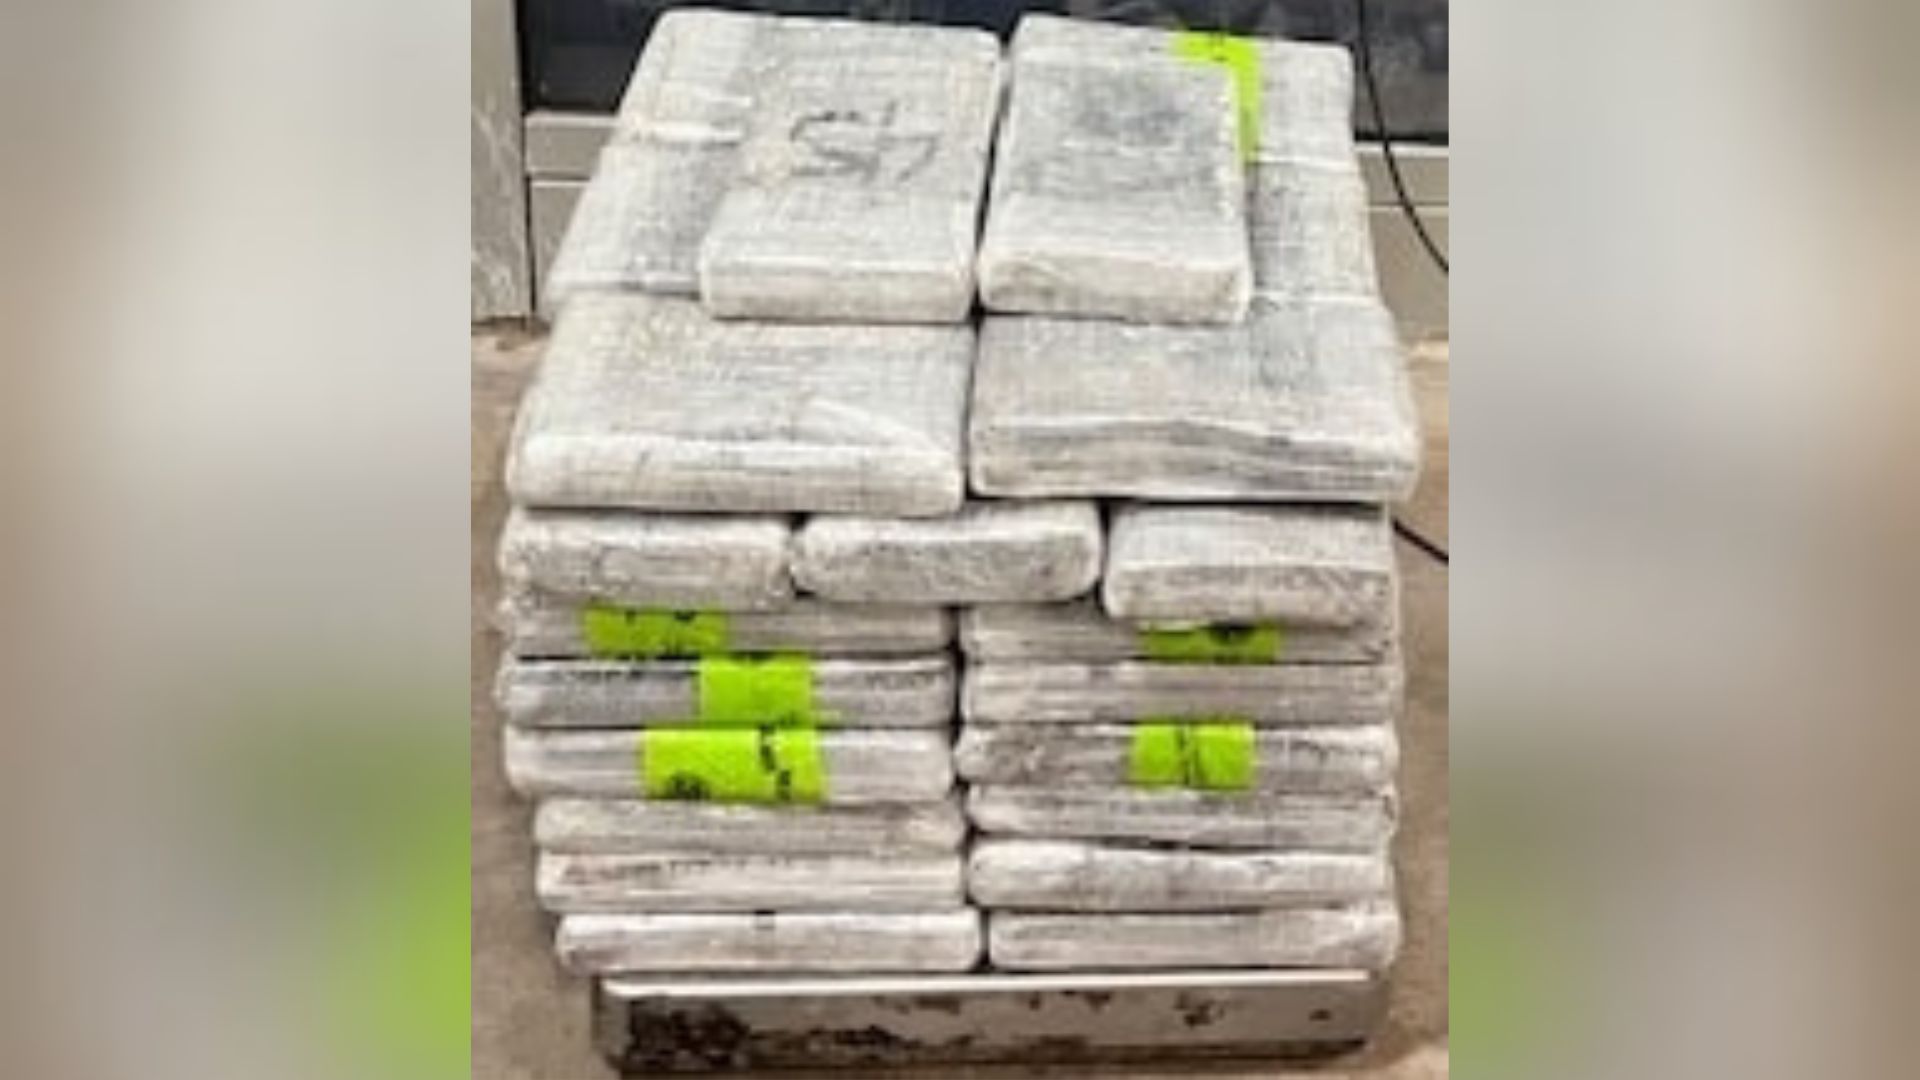 CBP finds nearly 122 pounds of cocaine in concrete blocks at Pharr bridge